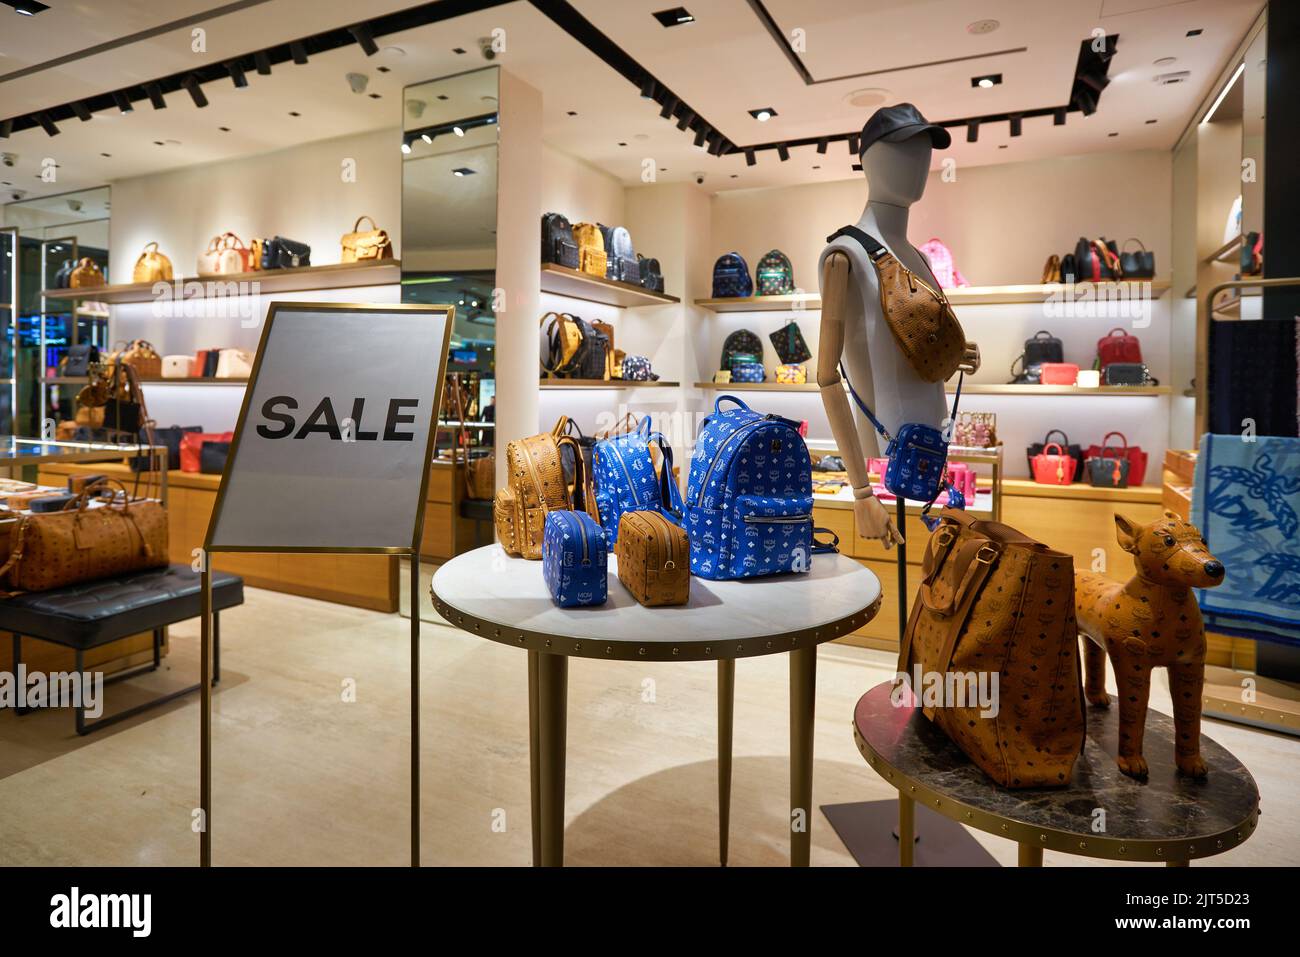 SINGAPORE - CIRCA JANUARY, 2020: MCM bags on display at store in ...